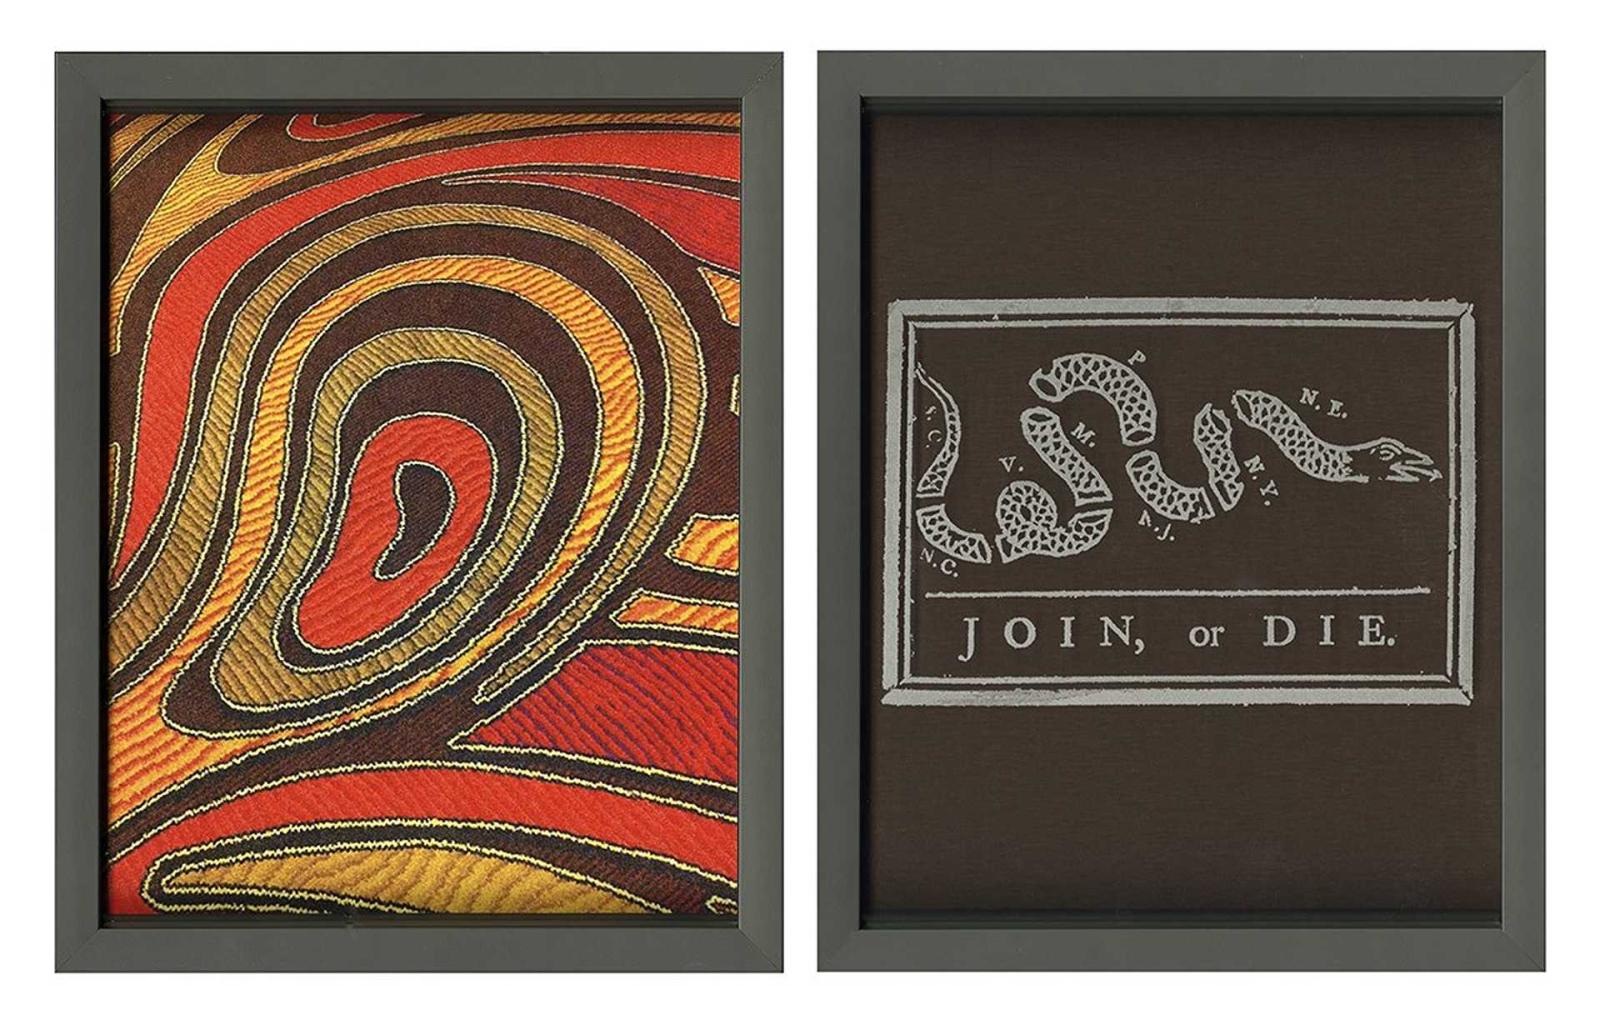 Left panel: swirls of red, brown, and yellow. Right panel: a stylized snake broken into sections with the text "Join, or Die" underneath it.